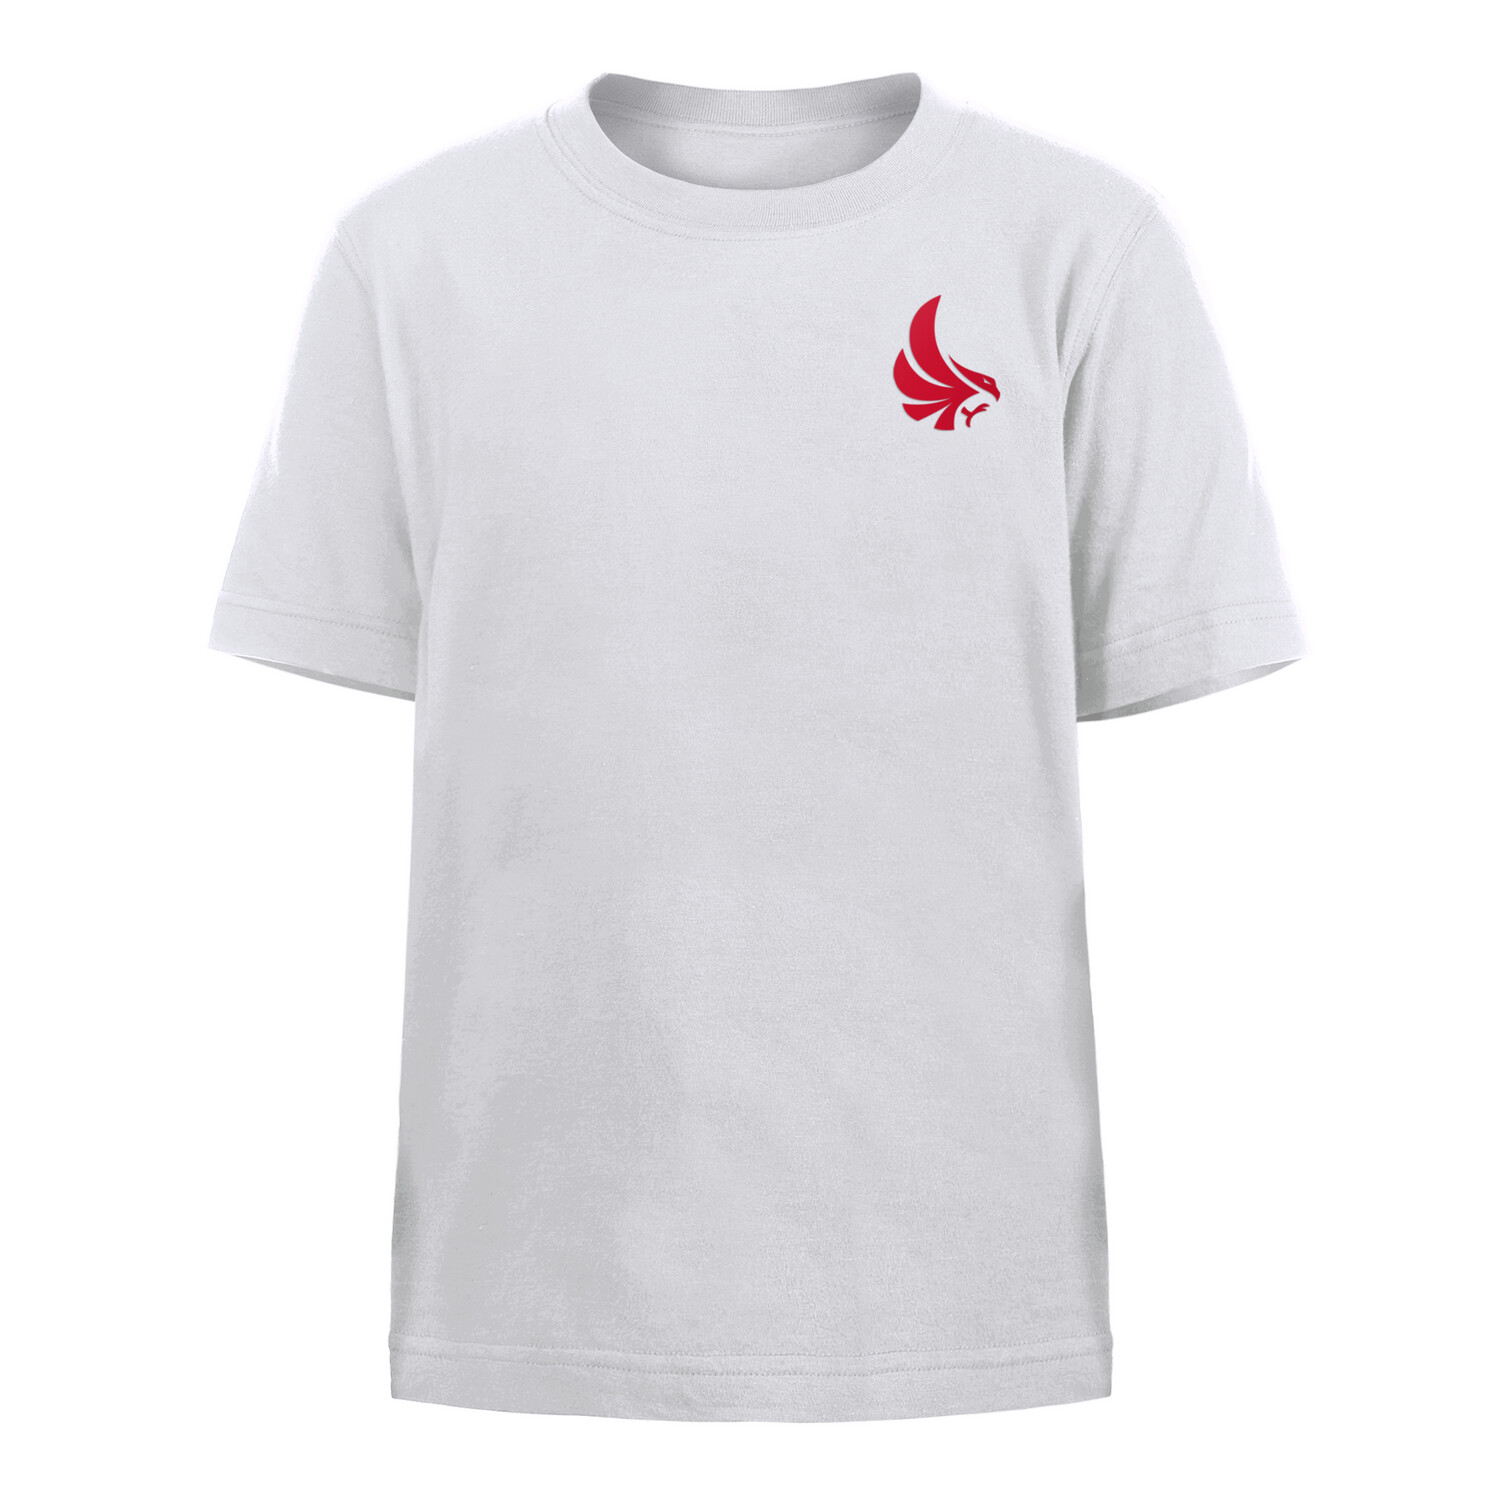 YOUTH HOME TEAM - WHITE, SIZE: SMALL